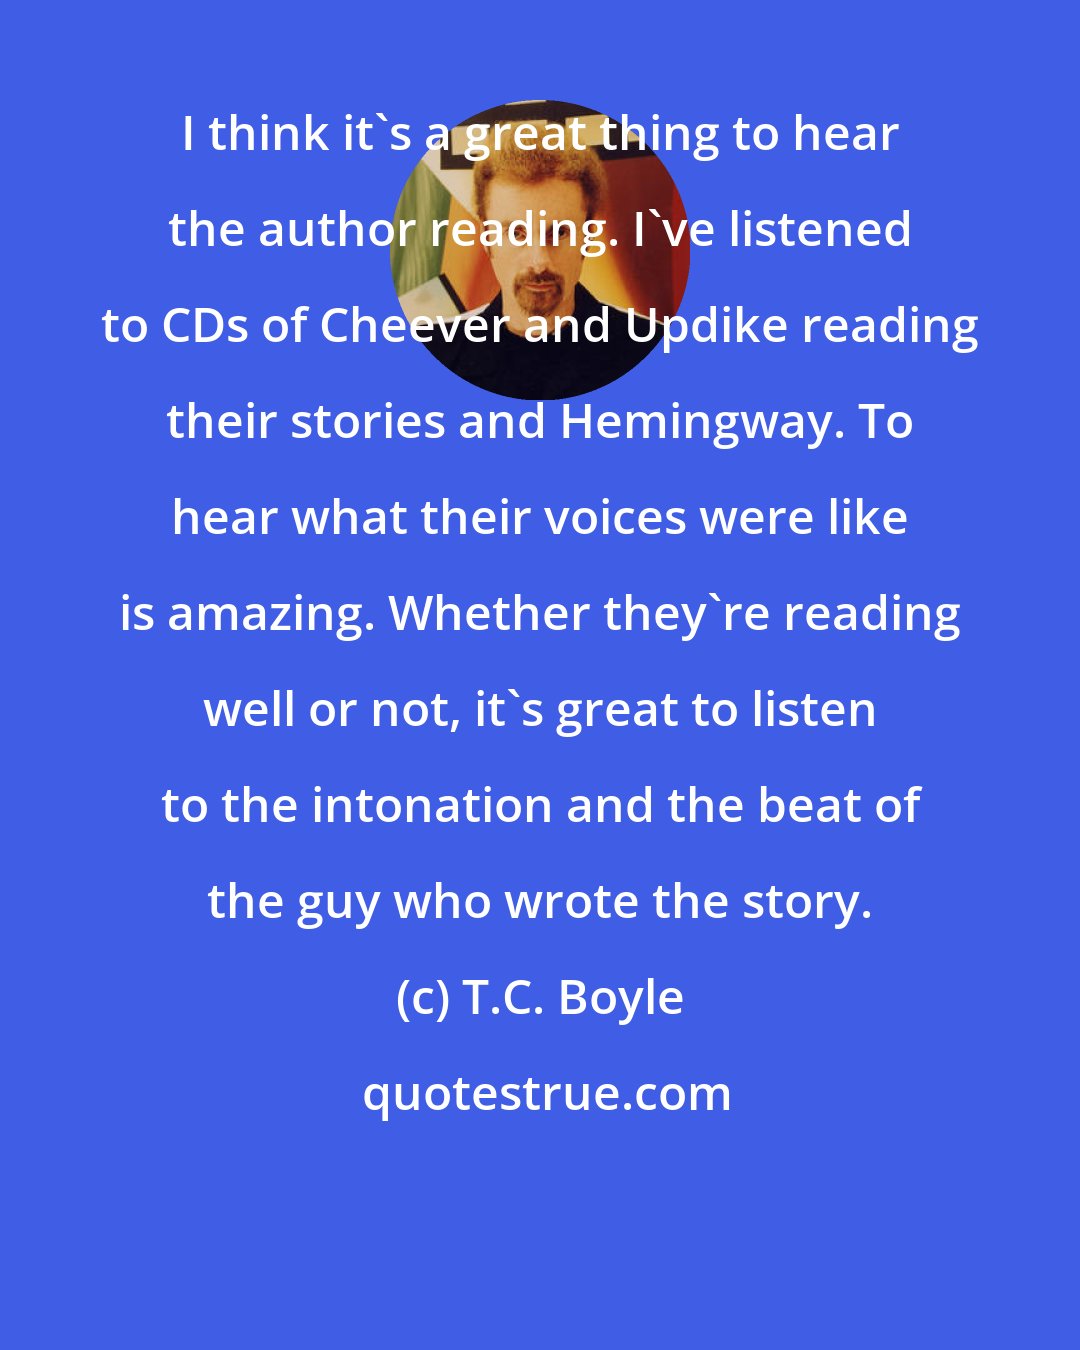 T.C. Boyle: I think it's a great thing to hear the author reading. I've listened to CDs of Cheever and Updike reading their stories and Hemingway. To hear what their voices were like is amazing. Whether they're reading well or not, it's great to listen to the intonation and the beat of the guy who wrote the story.